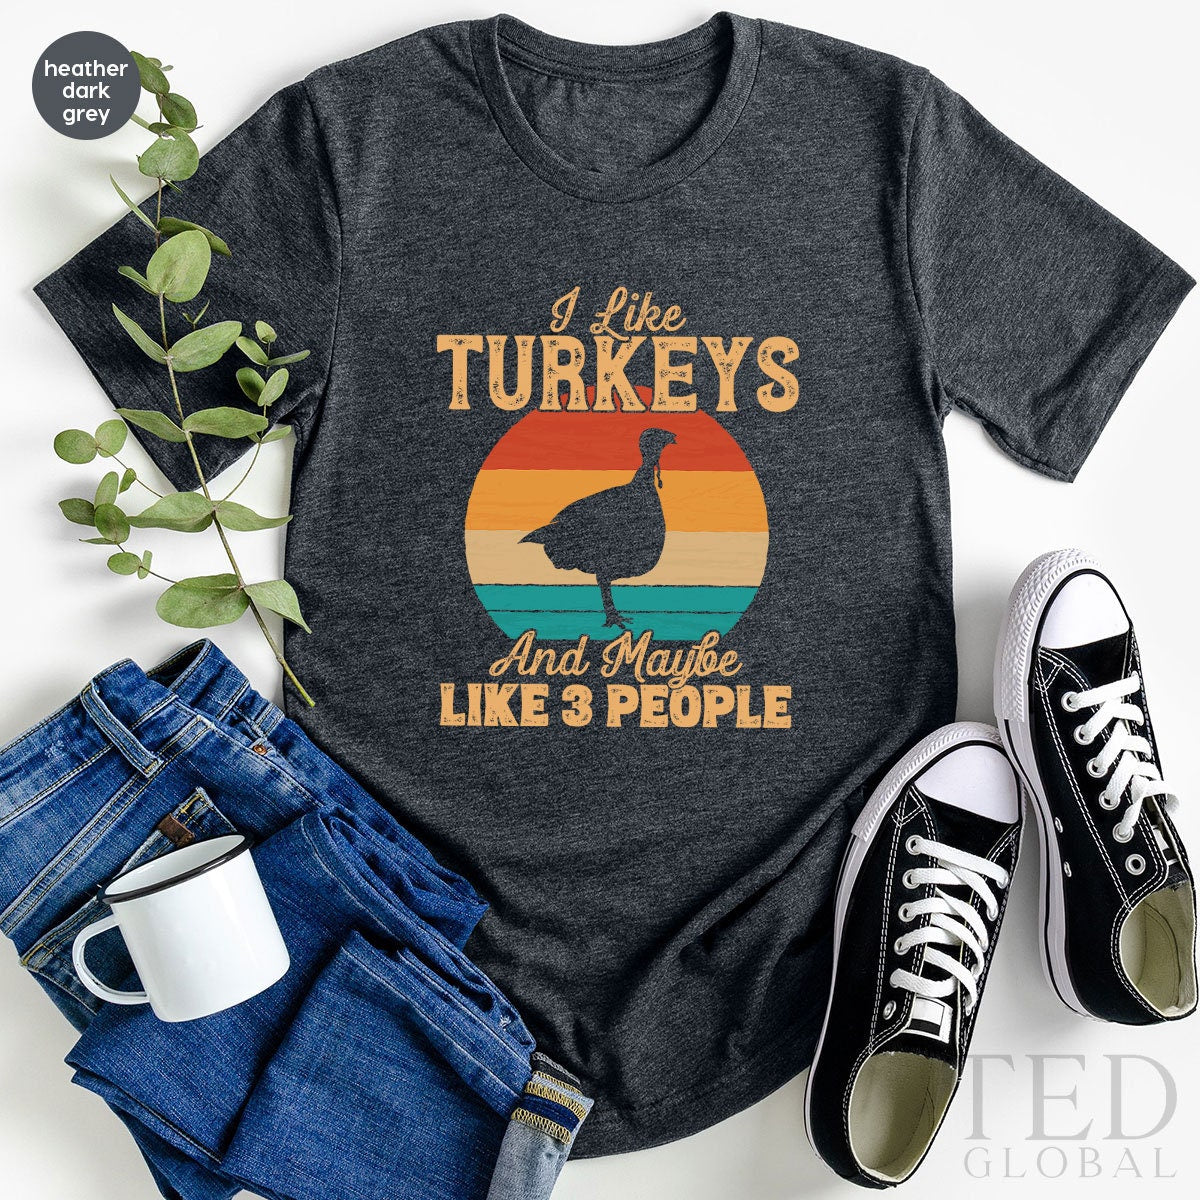 Thanksgiving Turkey T-Shirt, I Like Turkeys T Shirt, And Maybe 3 People Shirts, Funny Wine Turkey Family Fall Shirt, Gift For Thanksgiving - Fastdeliverytees.com